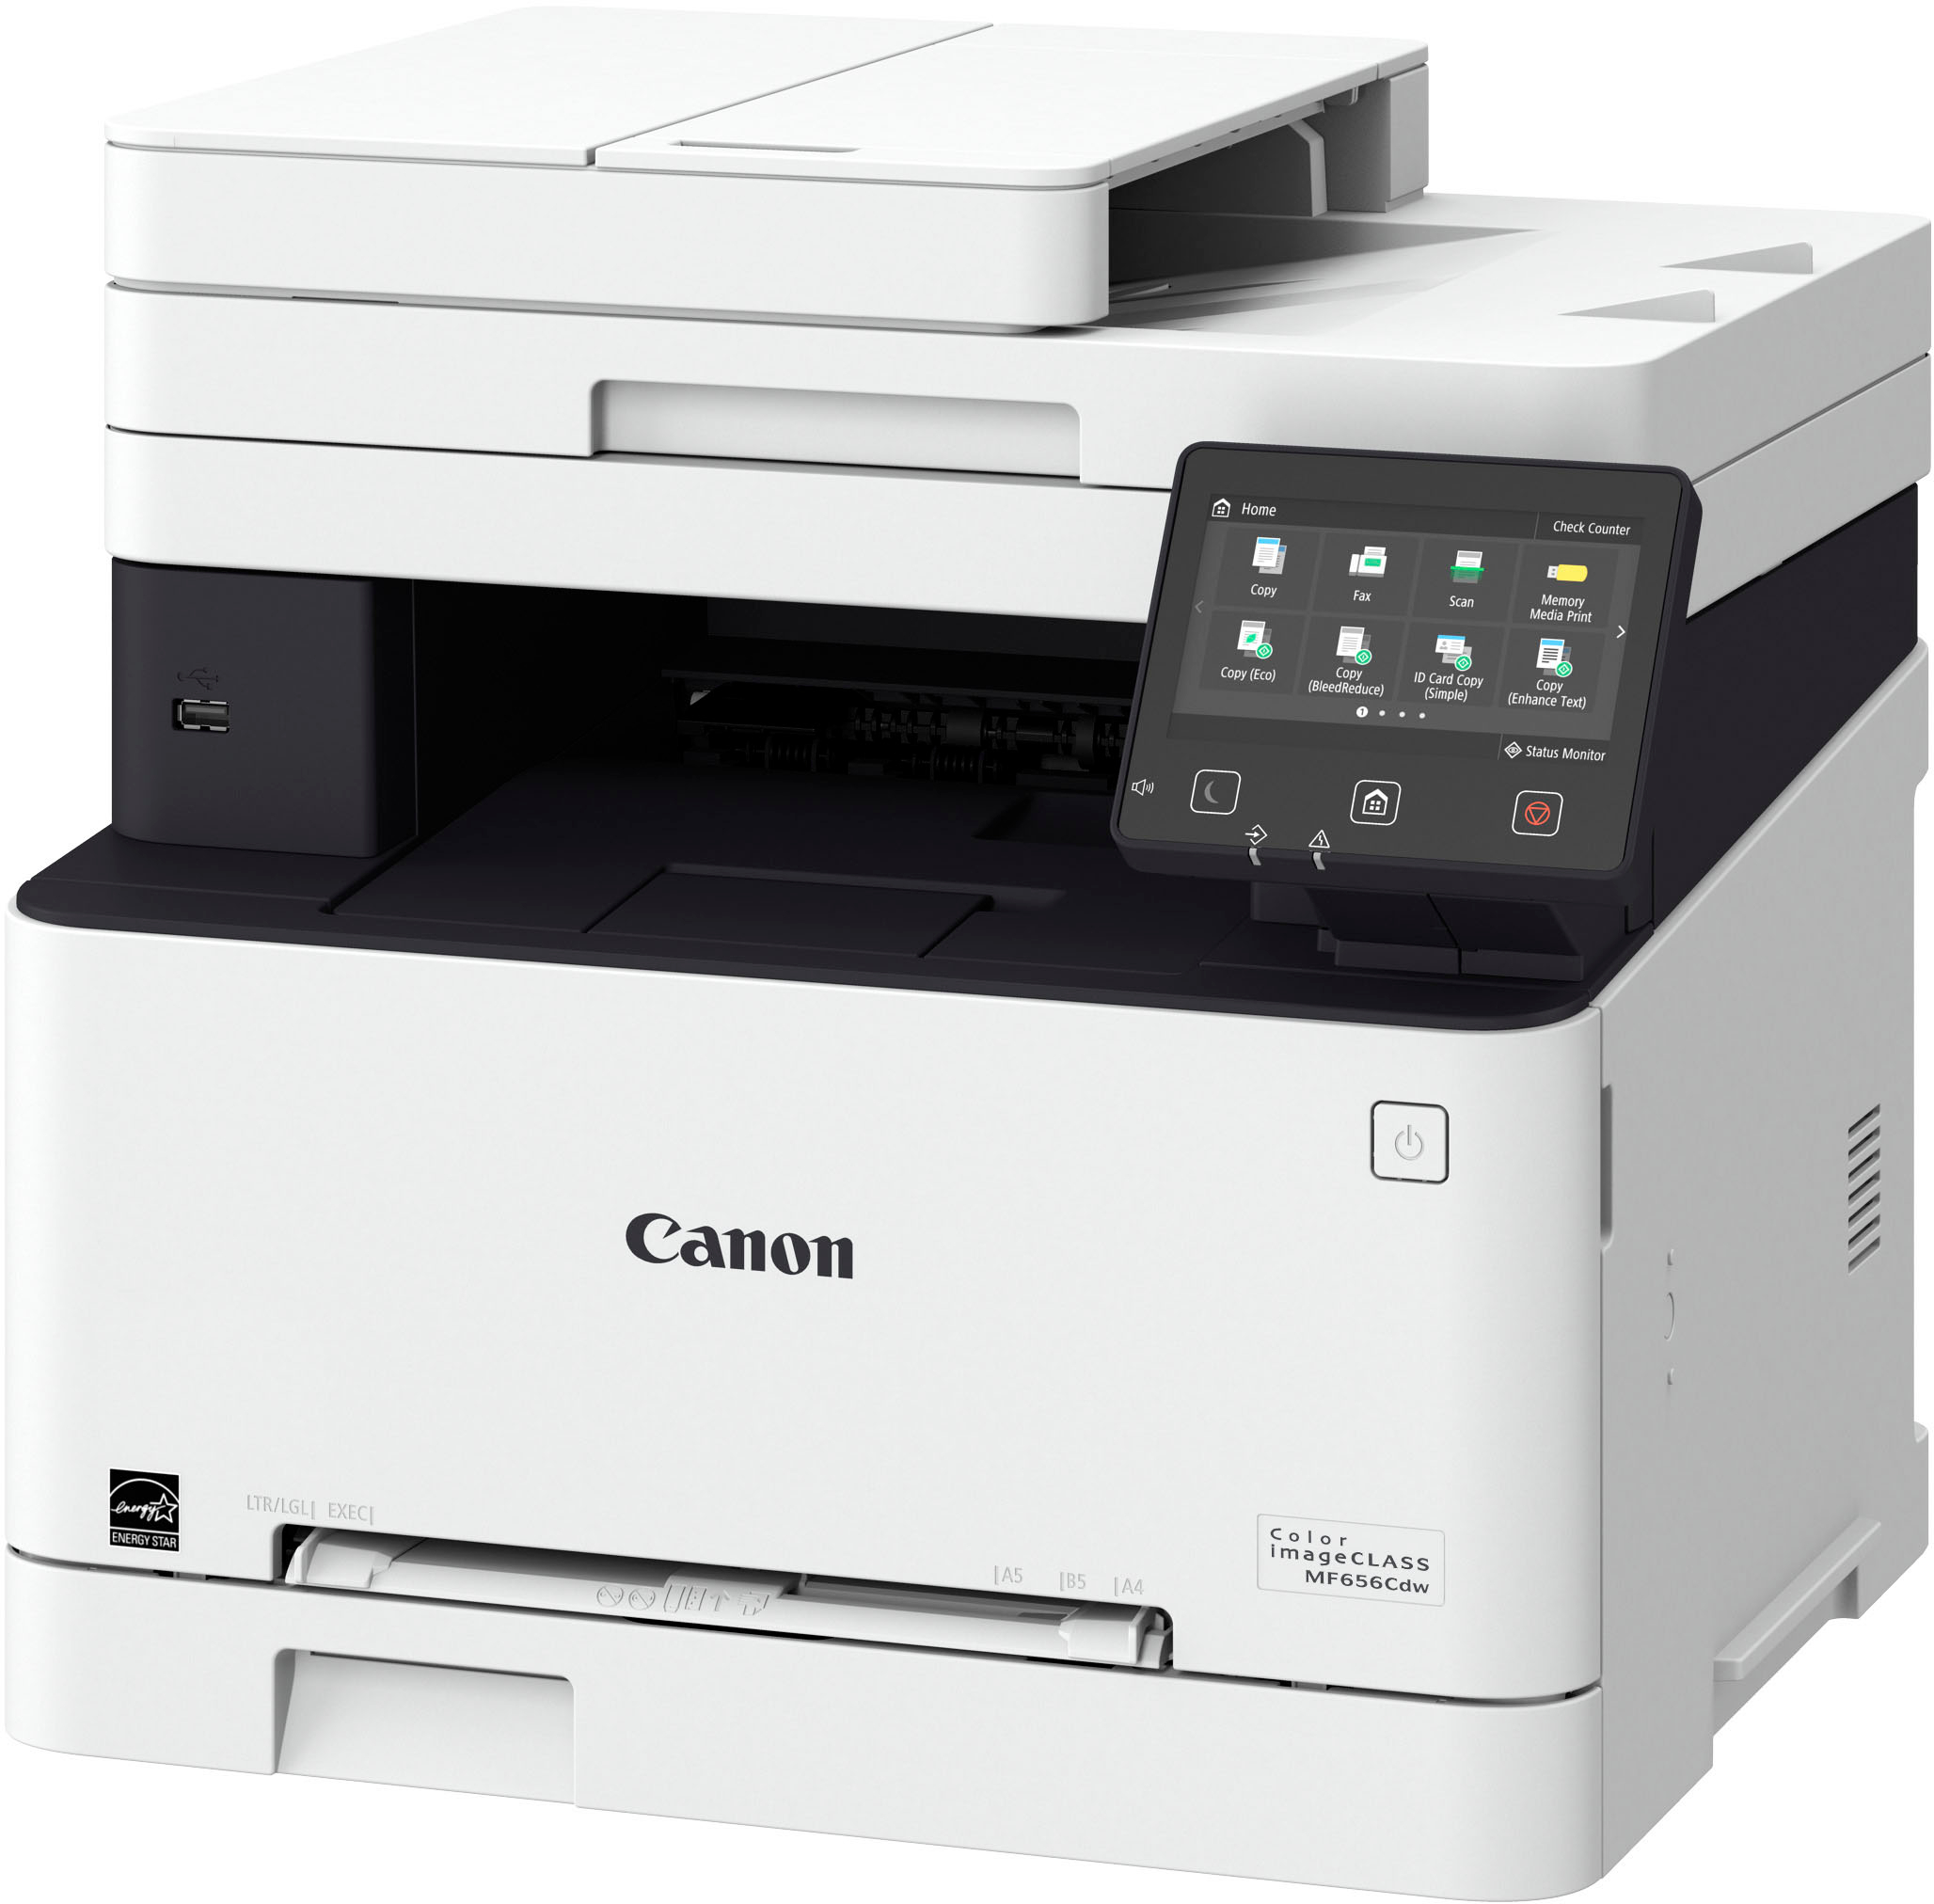 Angle View: Canon - imageCLASS MF656Cdw Wireless Color All-In-One Laser Printer with Fax - White